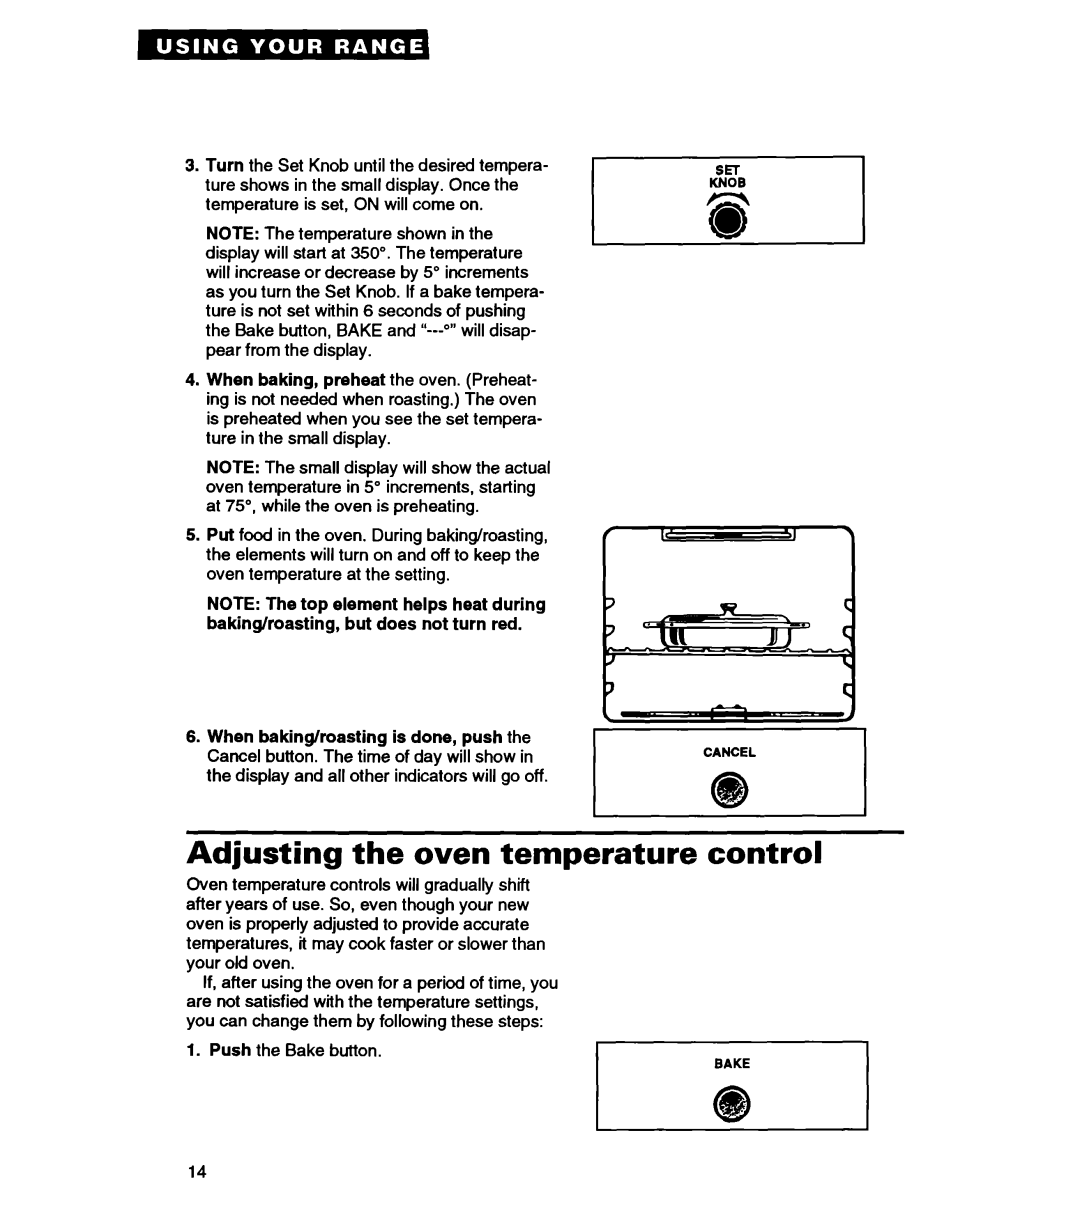 Whirlpool RS363PXY manual Adjusting the oven temperature control, Push 